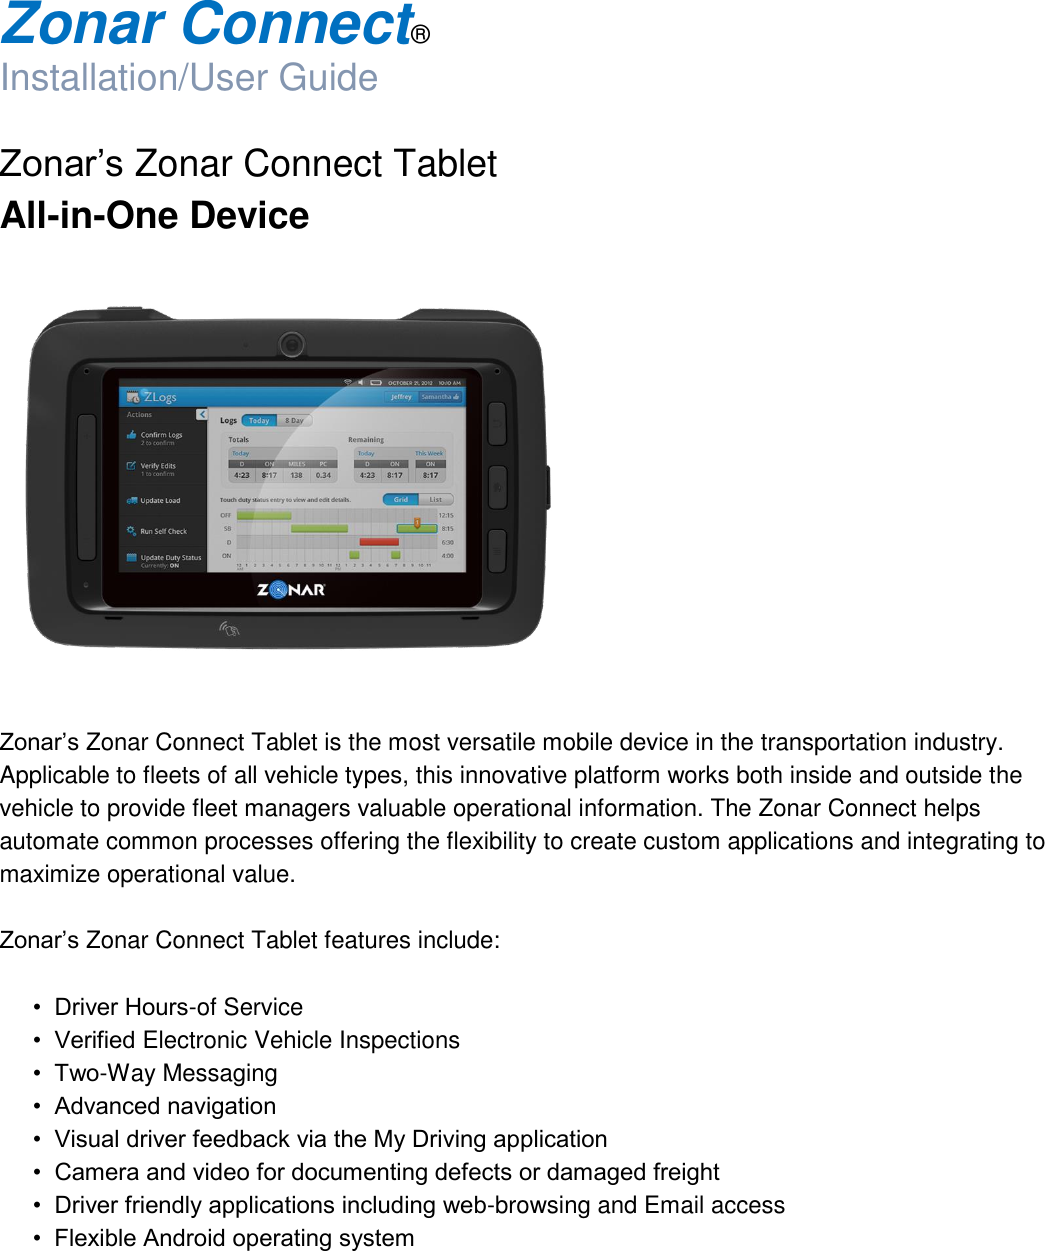  Zonar Connect®  Installation/User Guide  Zonar’s Zonar Connect Tablet All-in-One Device     Zonar’s Zonar Connect Tablet is the most versatile mobile device in the transportation industry. Applicable to fleets of all vehicle types, this innovative platform works both inside and outside the vehicle to provide fleet managers valuable operational information. The Zonar Connect helps automate common processes offering the flexibility to create custom applications and integrating to maximize operational value.  Zonar’s Zonar Connect Tablet features include:  •  Driver Hours-of Service •  Verified Electronic Vehicle Inspections •  Two-Way Messaging •  Advanced navigation •  Visual driver feedback via the My Driving application •  Camera and video for documenting defects or damaged freight •  Driver friendly applications including web-browsing and Email access •  Flexible Android operating system   